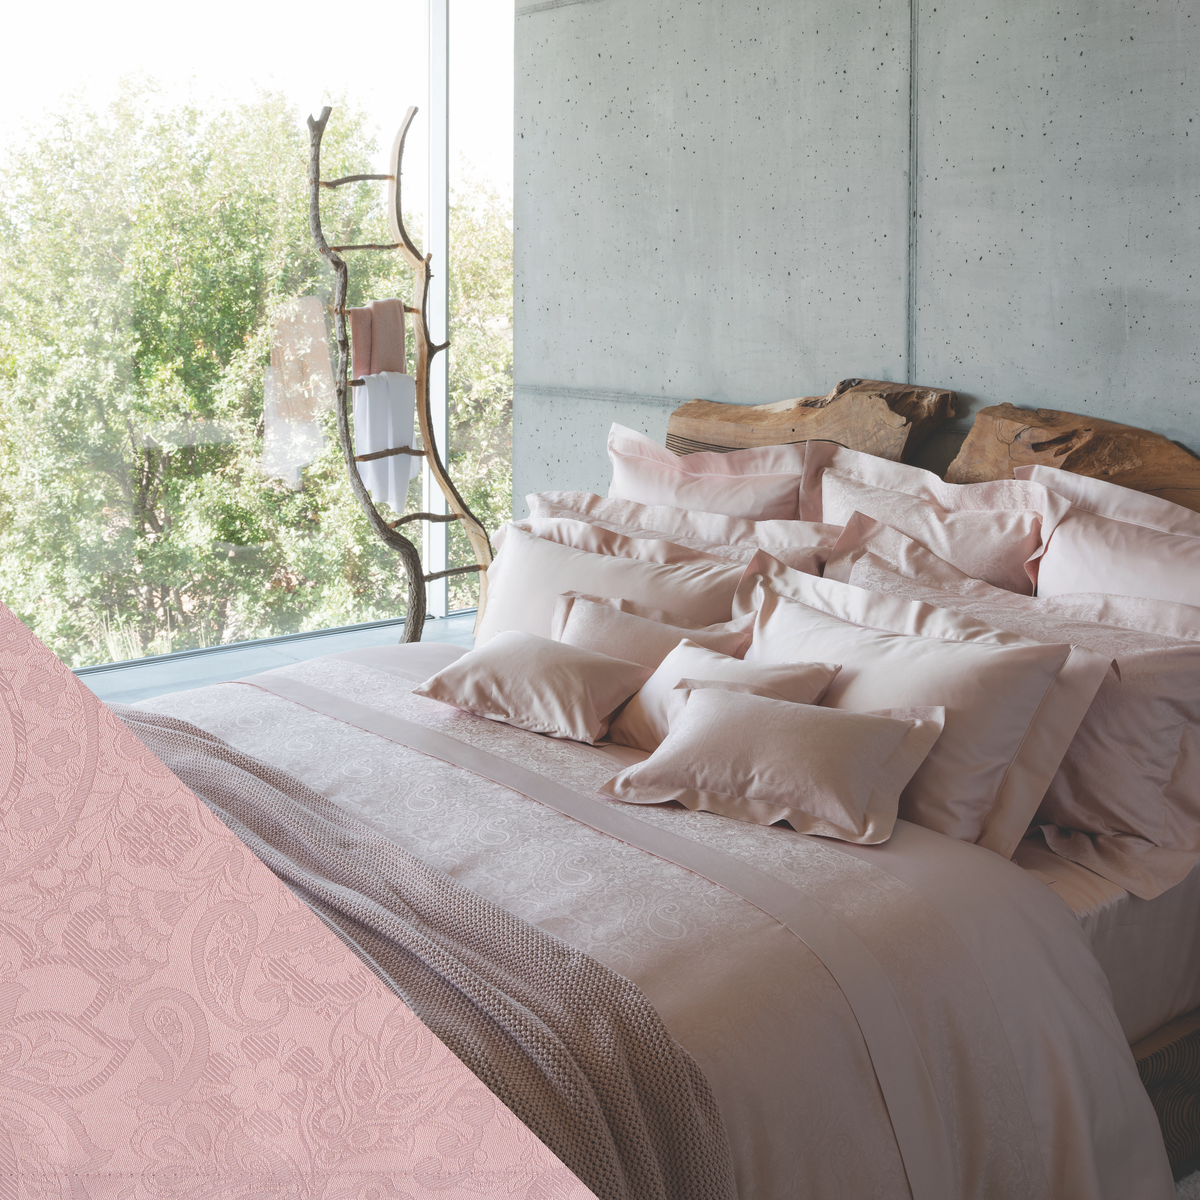 Lifestyle Shot of Full Bed in Celso de Lemos Joanne Collection in Nuage Rose Color